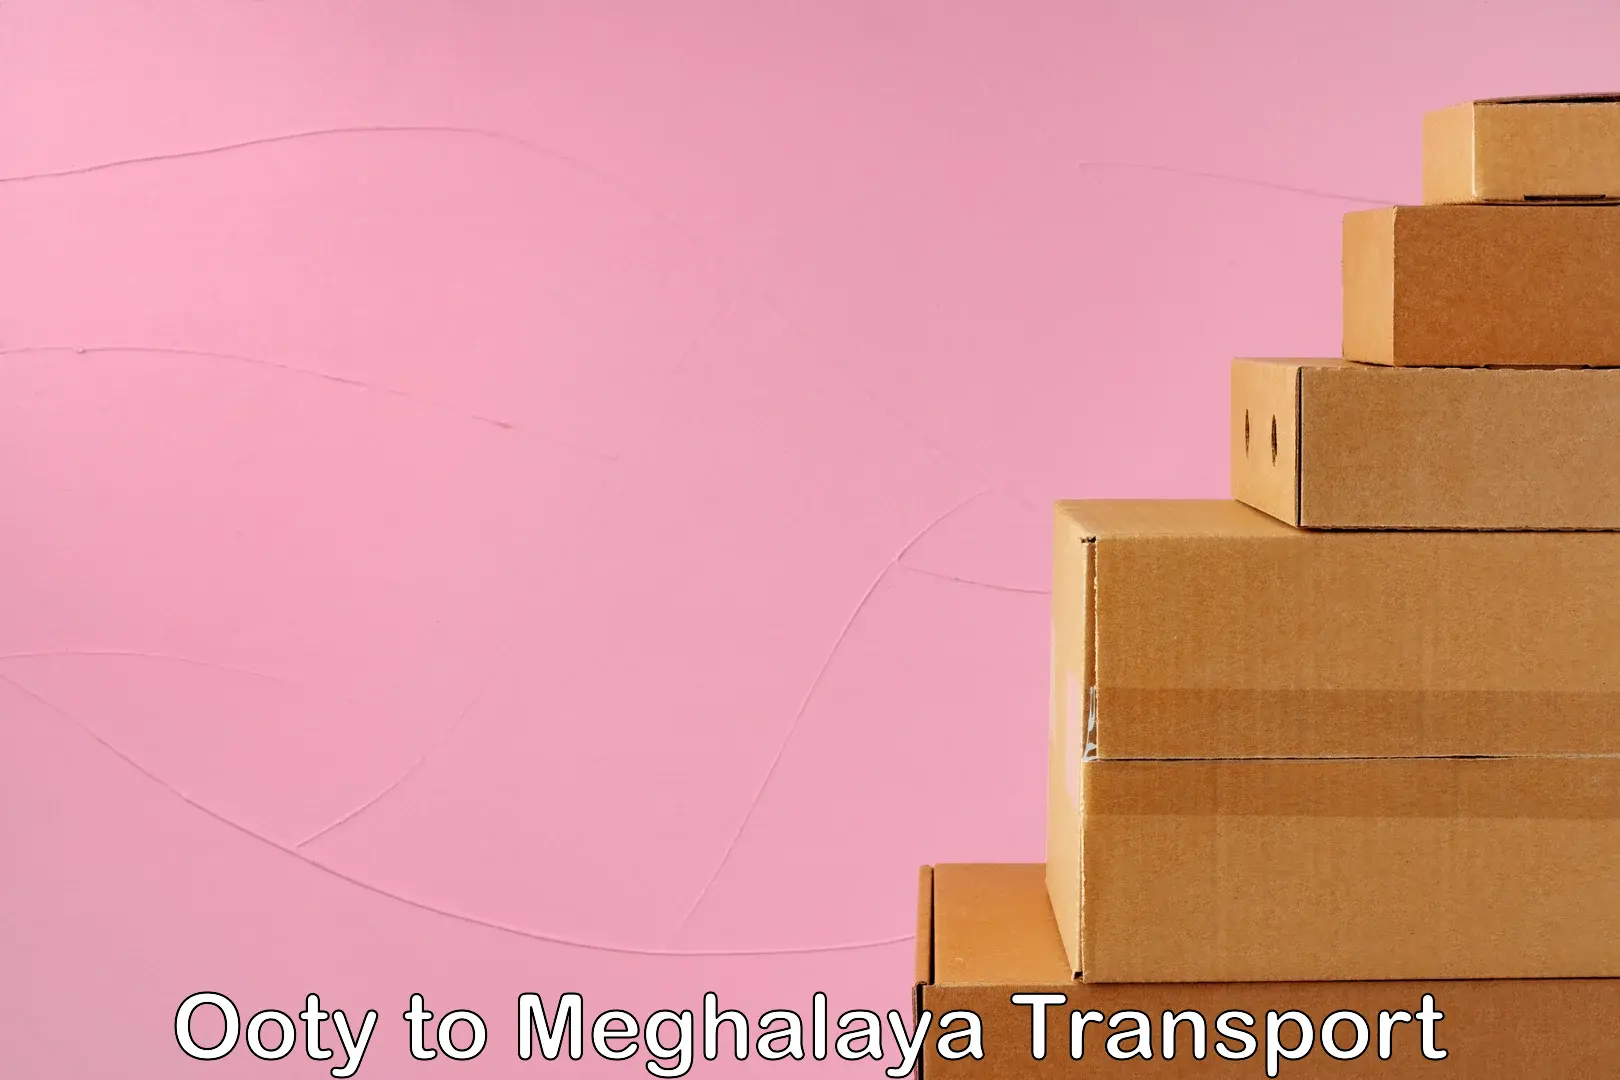 Container transport service Ooty to Meghalaya